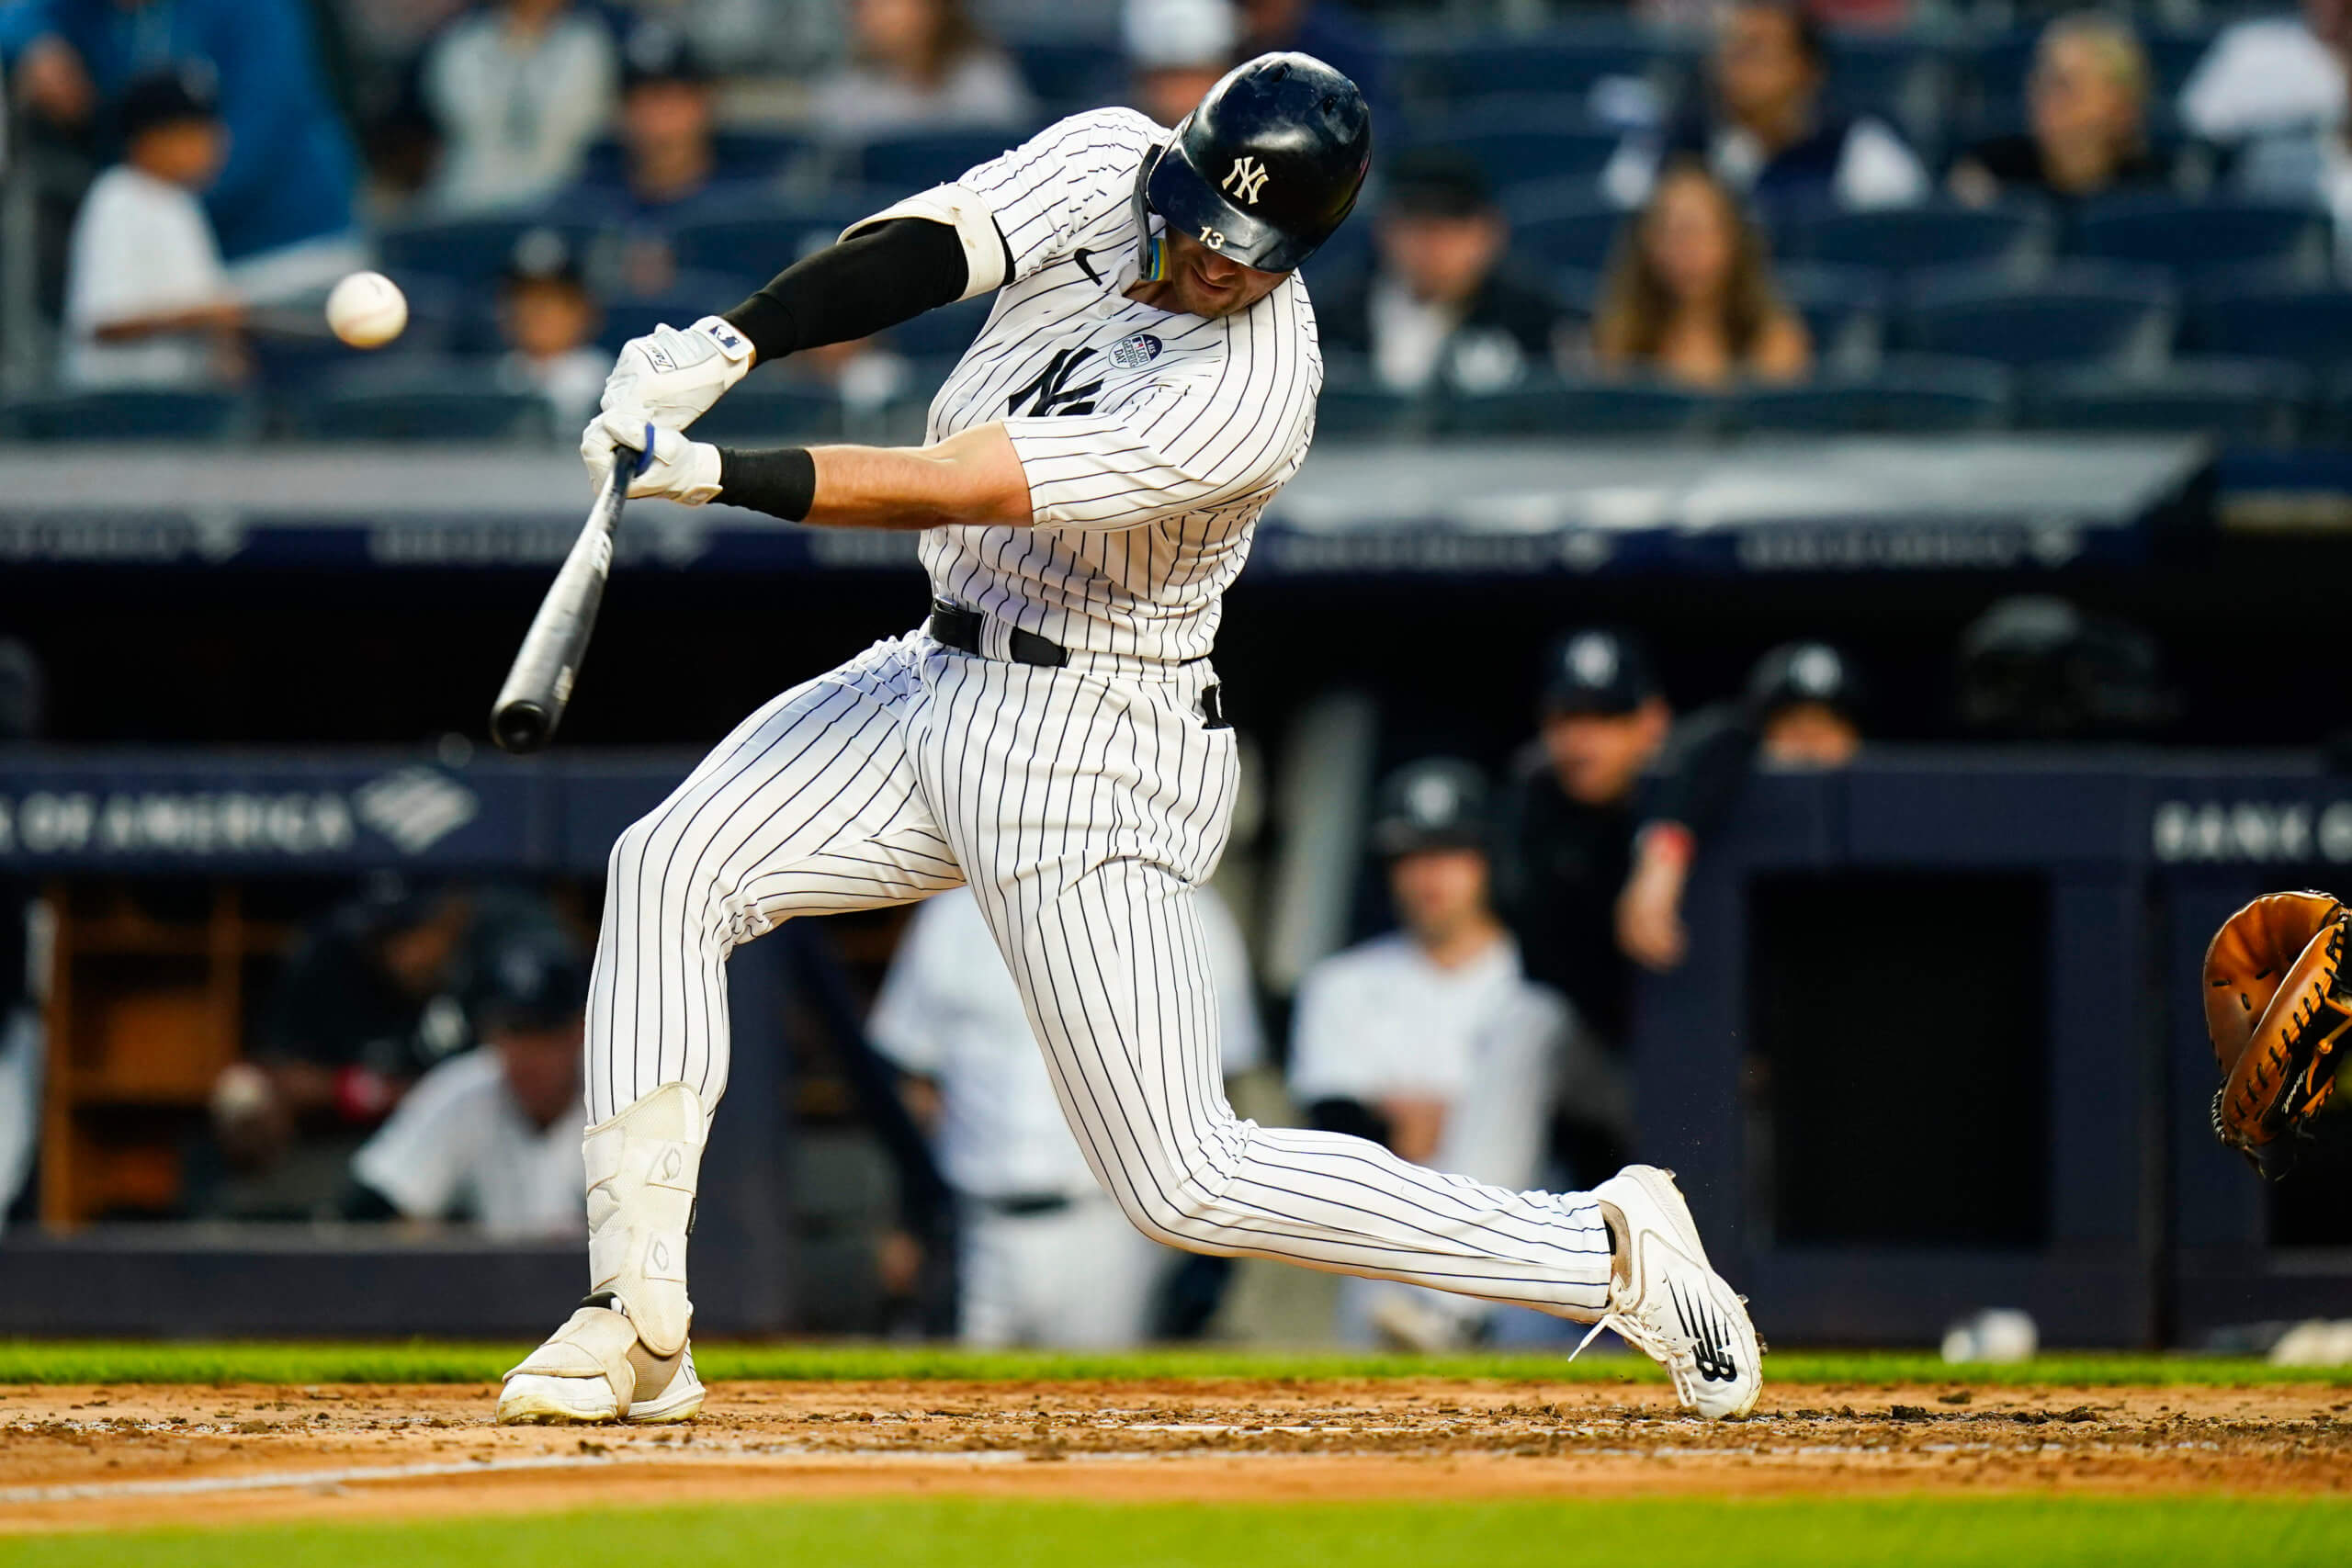 Latest on Yankees' Joey Gallo, who still is out with groin issue